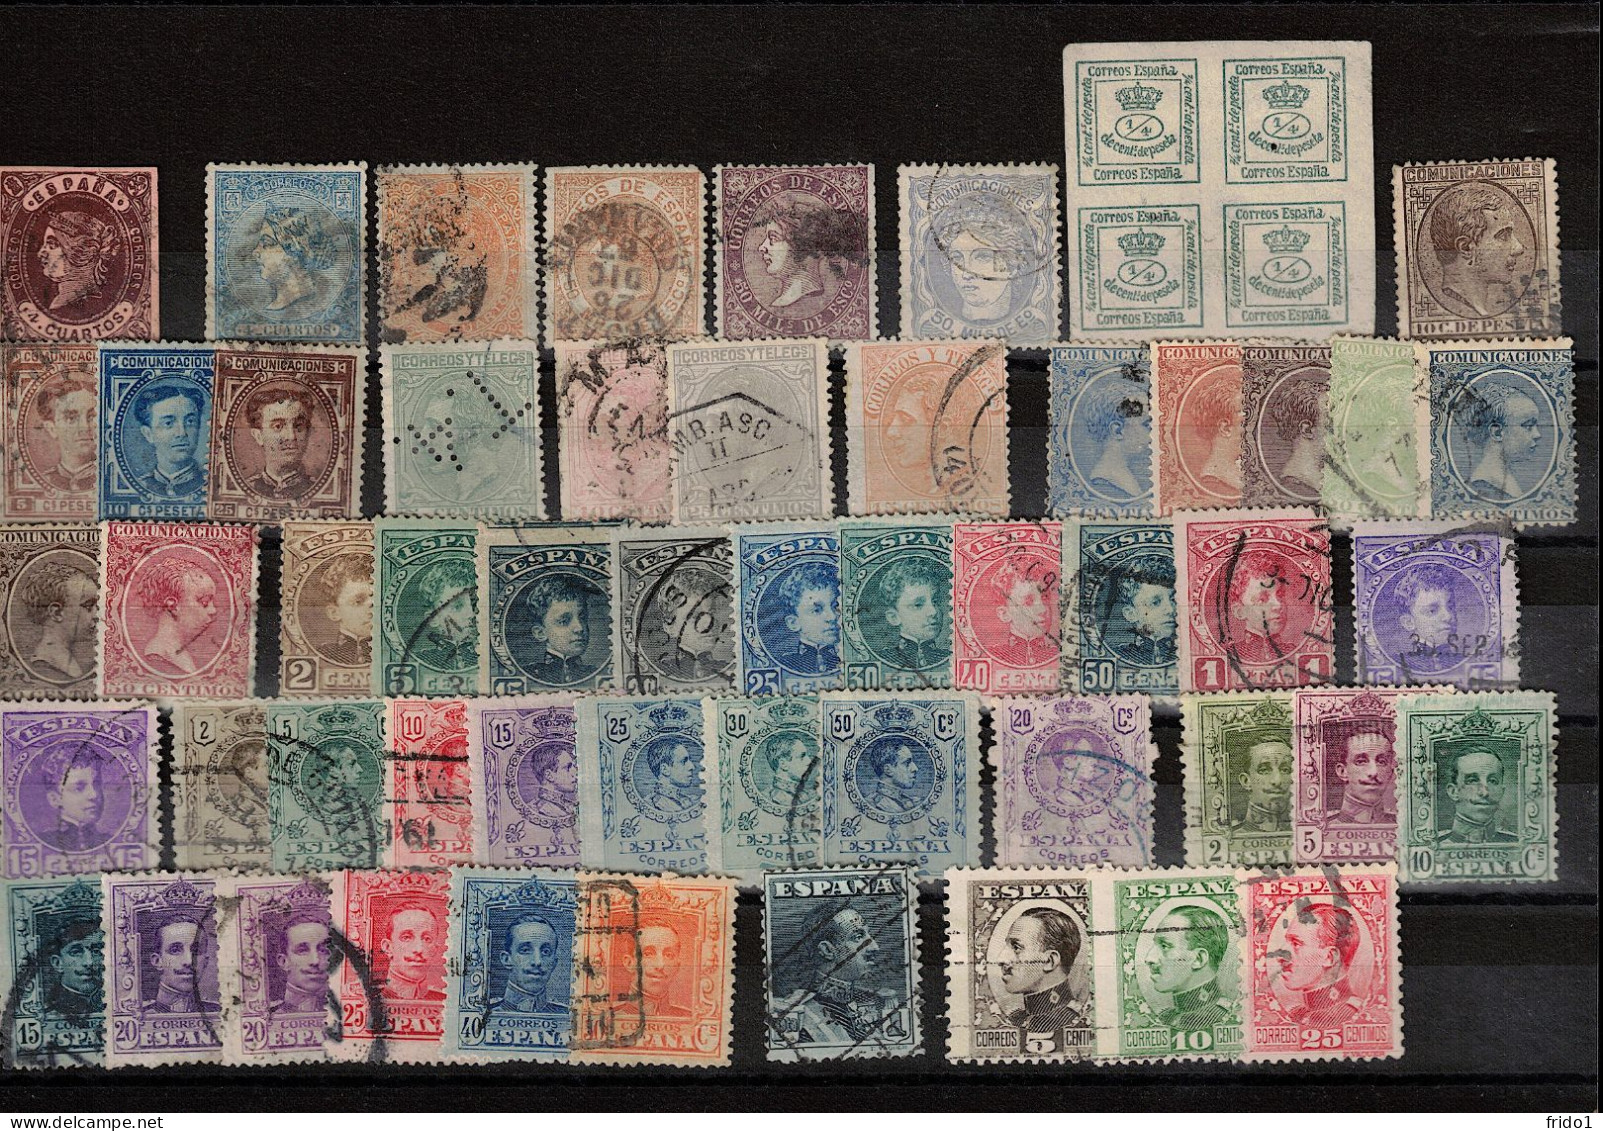 Spain Selection Of Stamps Fine Used - Colecciones